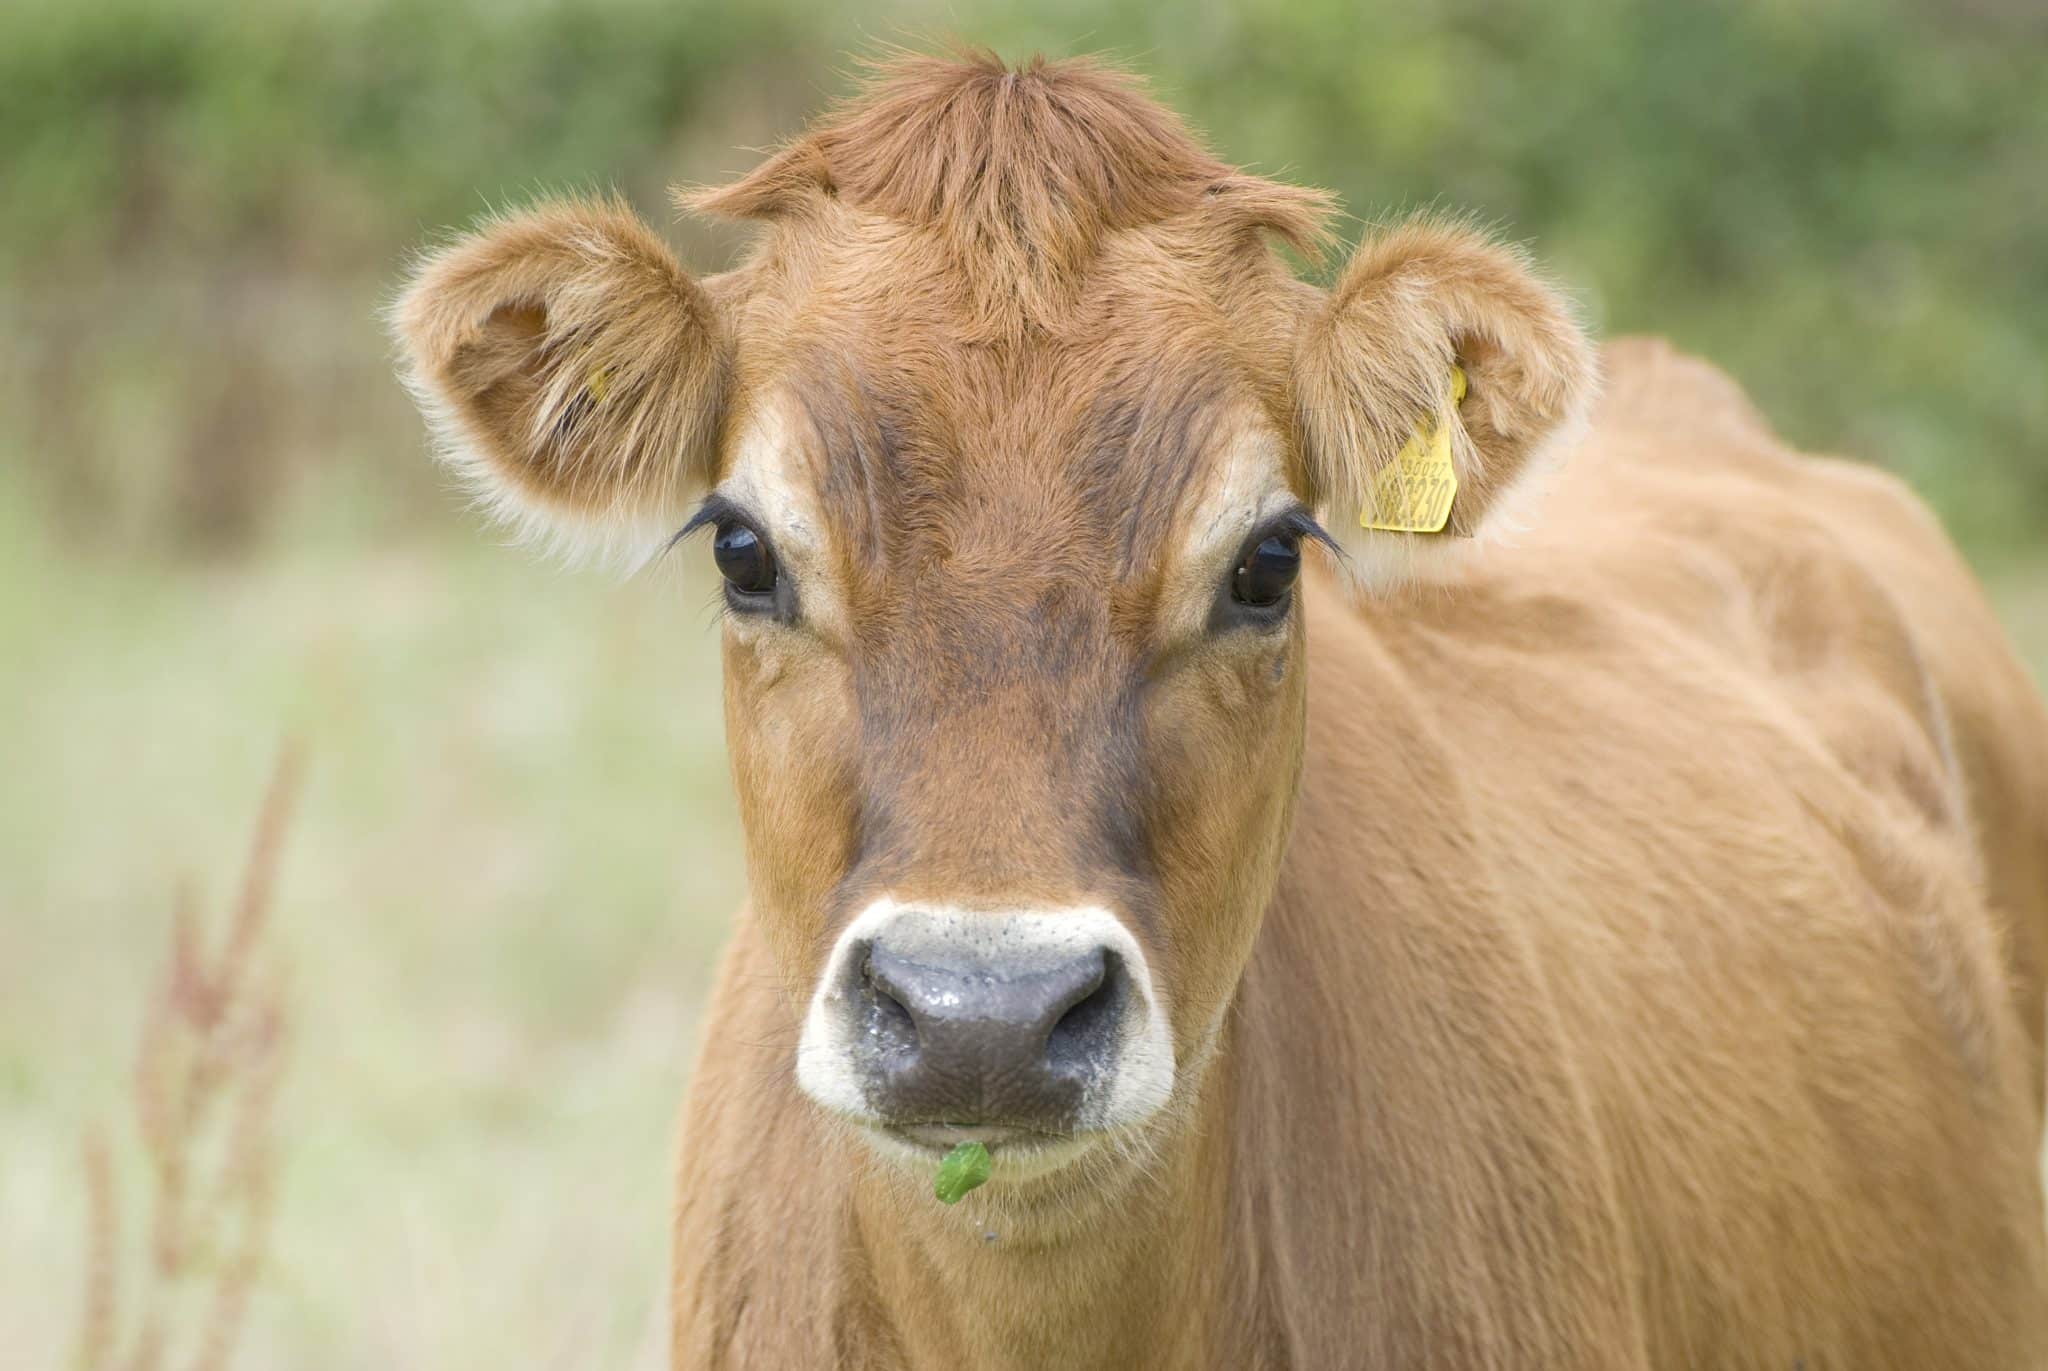 The Jersey cow.